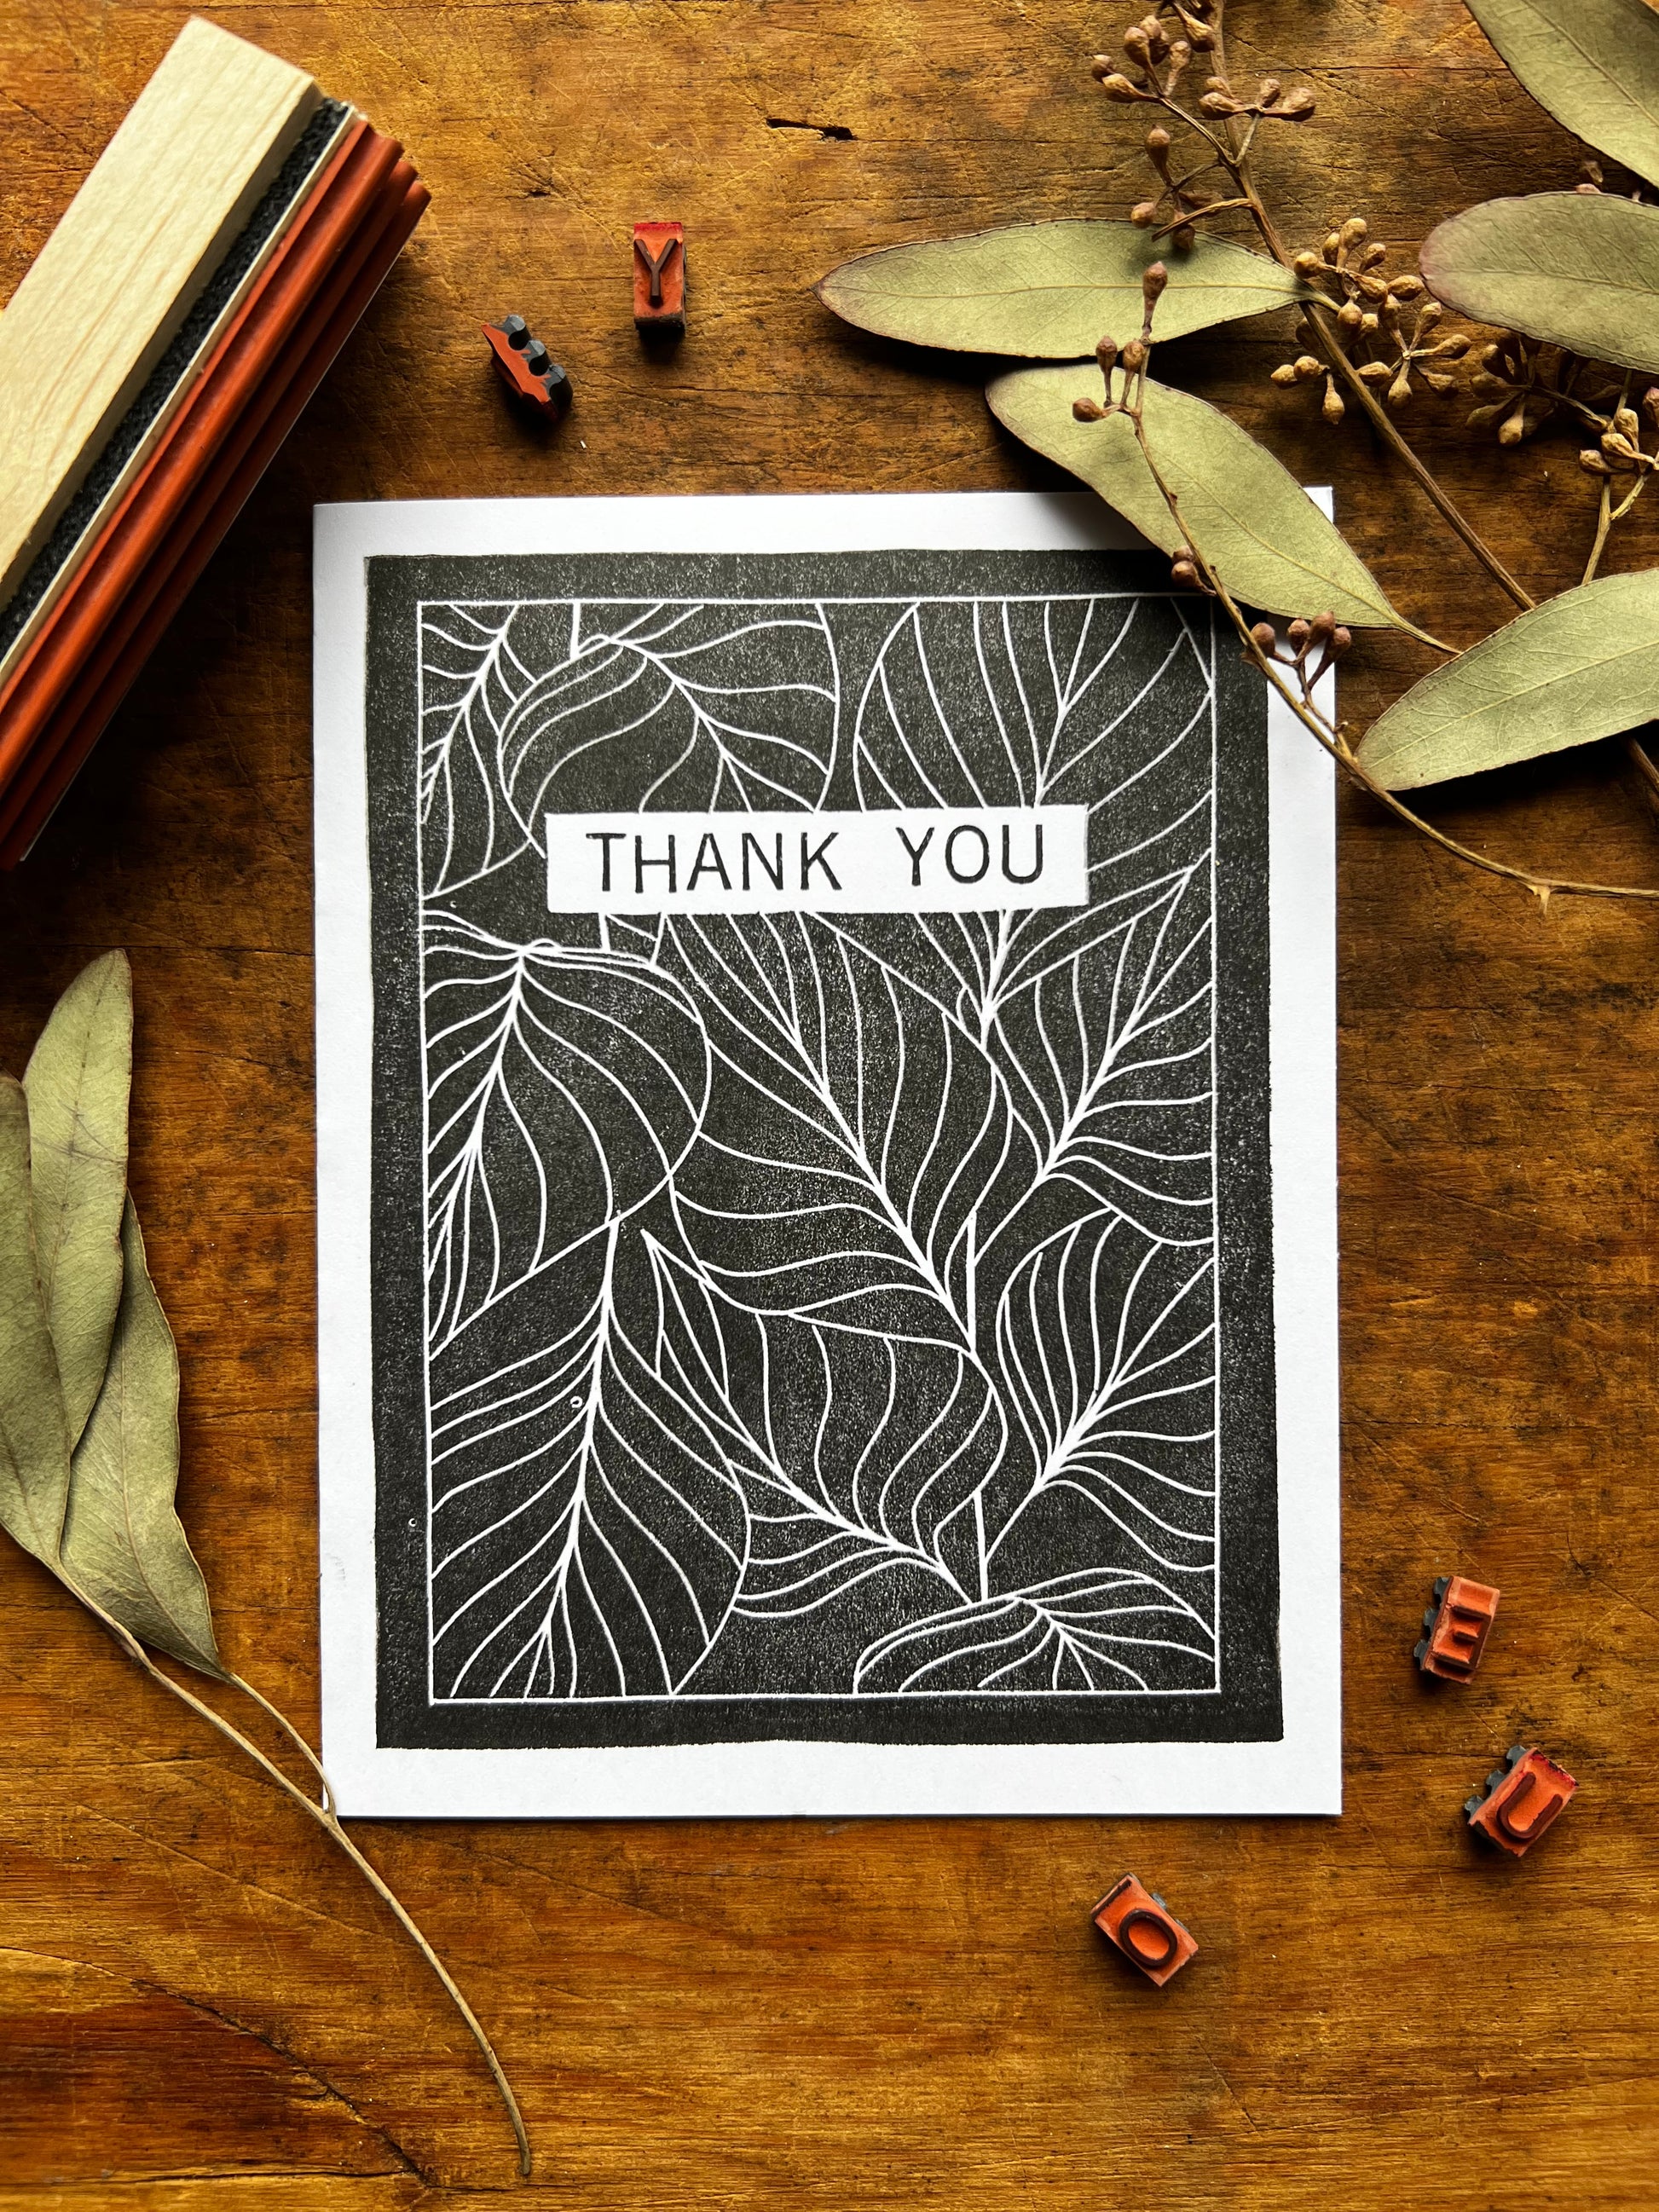 "Thank You" Big Leaves Hand Printed Greeting Card Single, Blank Inside, A2 Folded Size